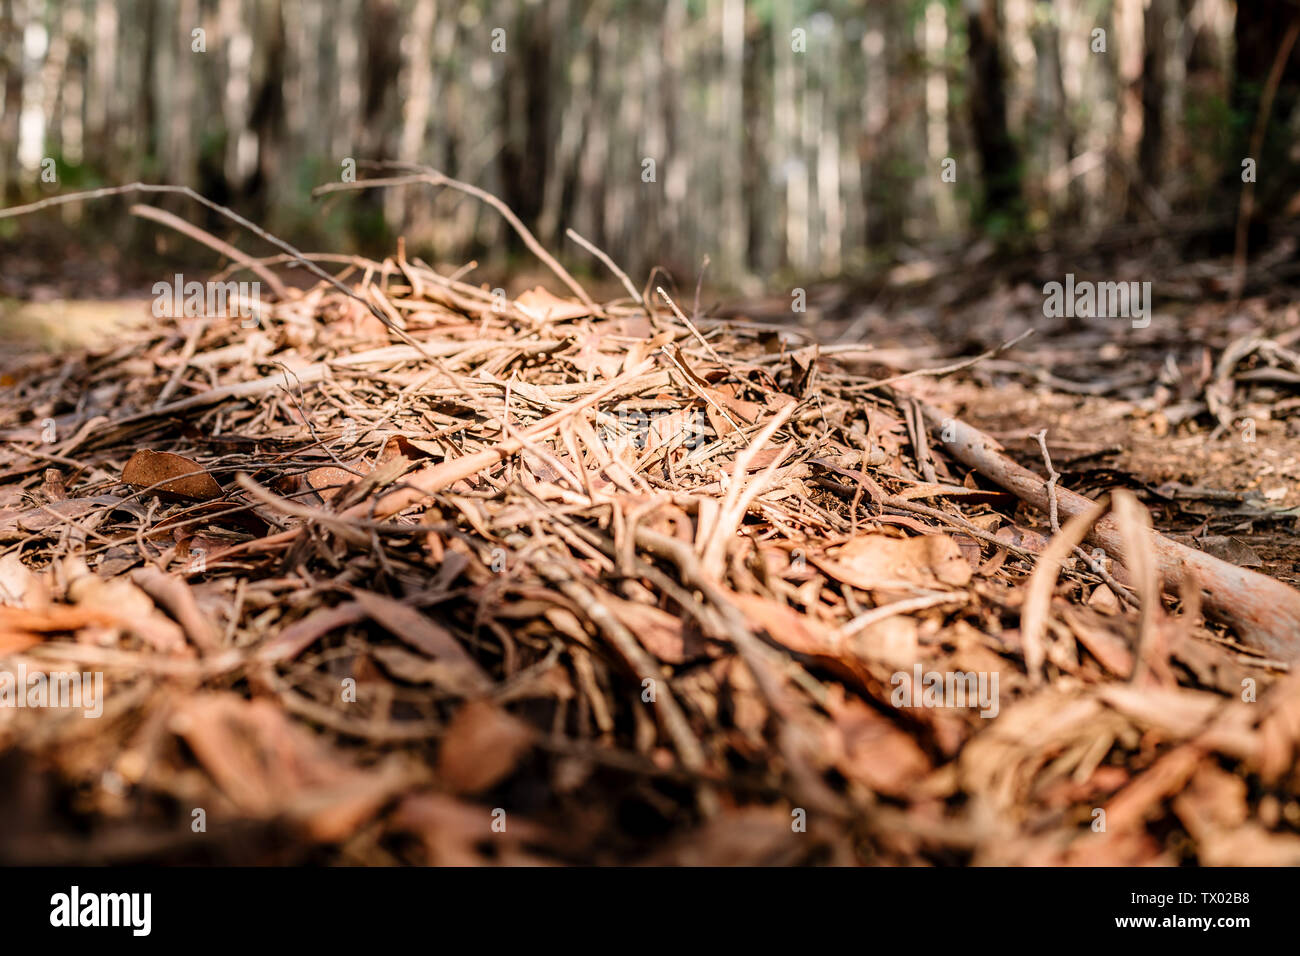 Ground image of fallen stick and twigs, with light and shadows, in a forest with distant trees Stock Photo